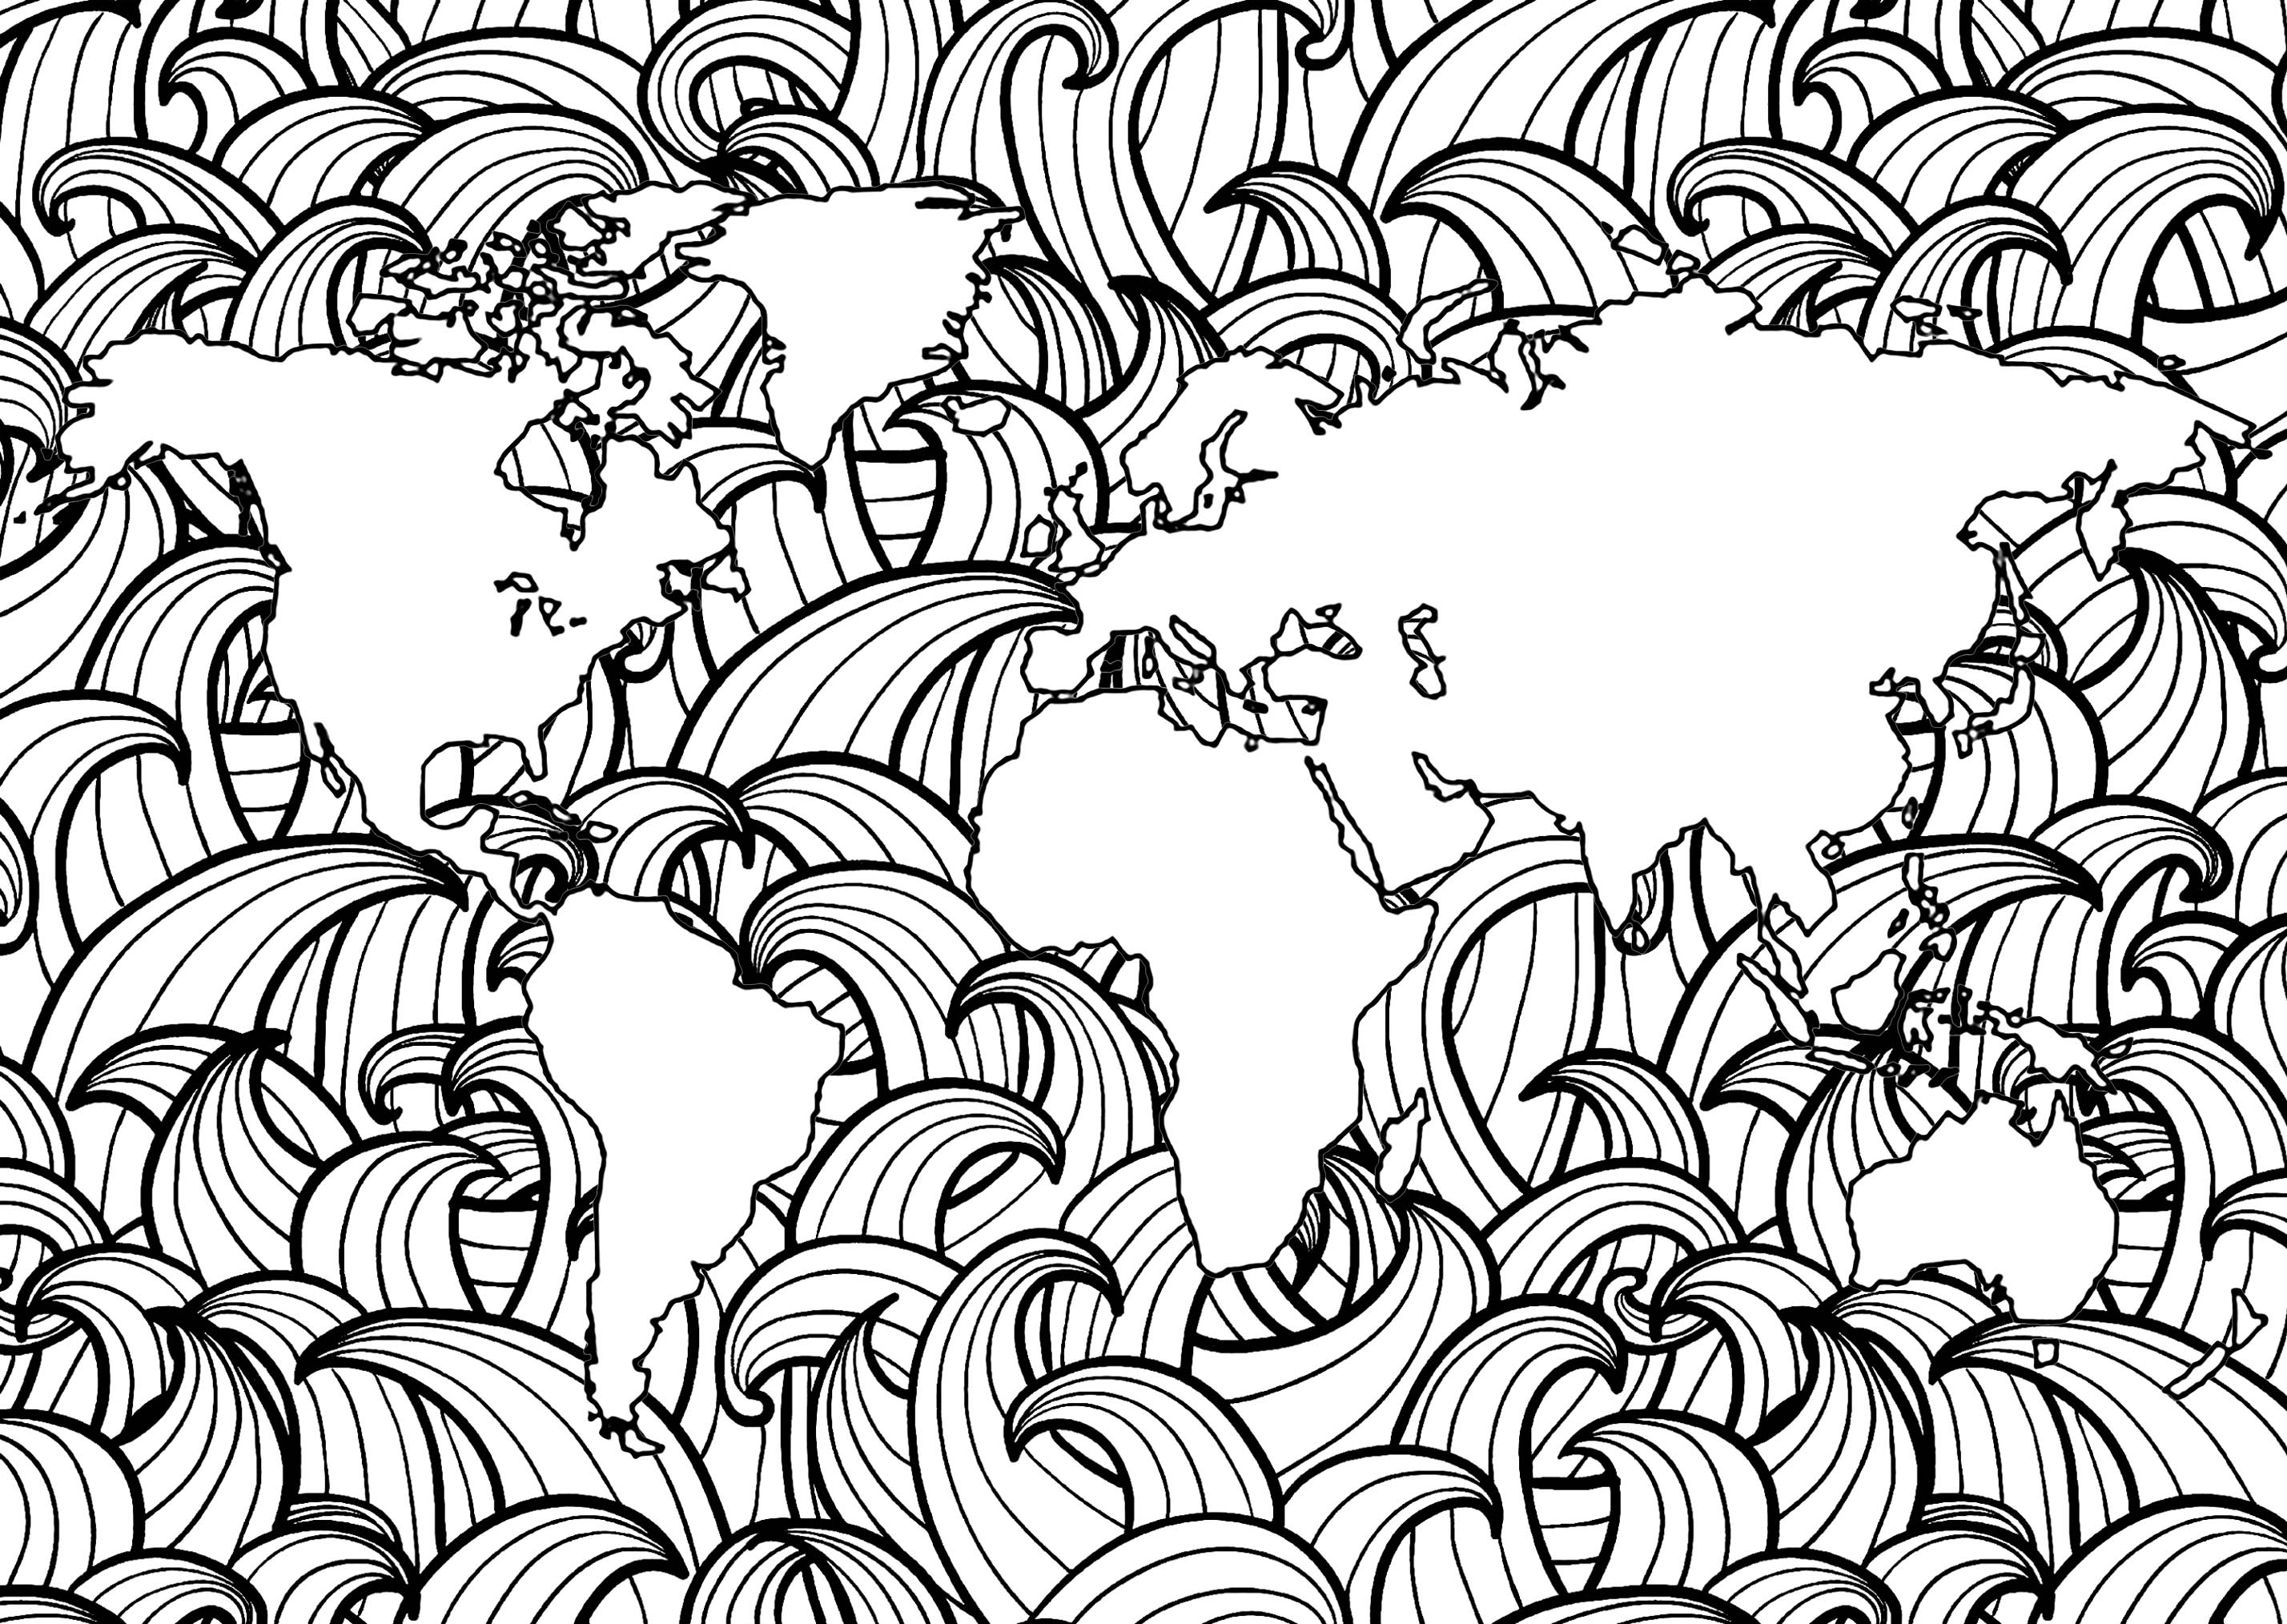 Download Earth with Waves - Anti stress Adult Coloring Pages